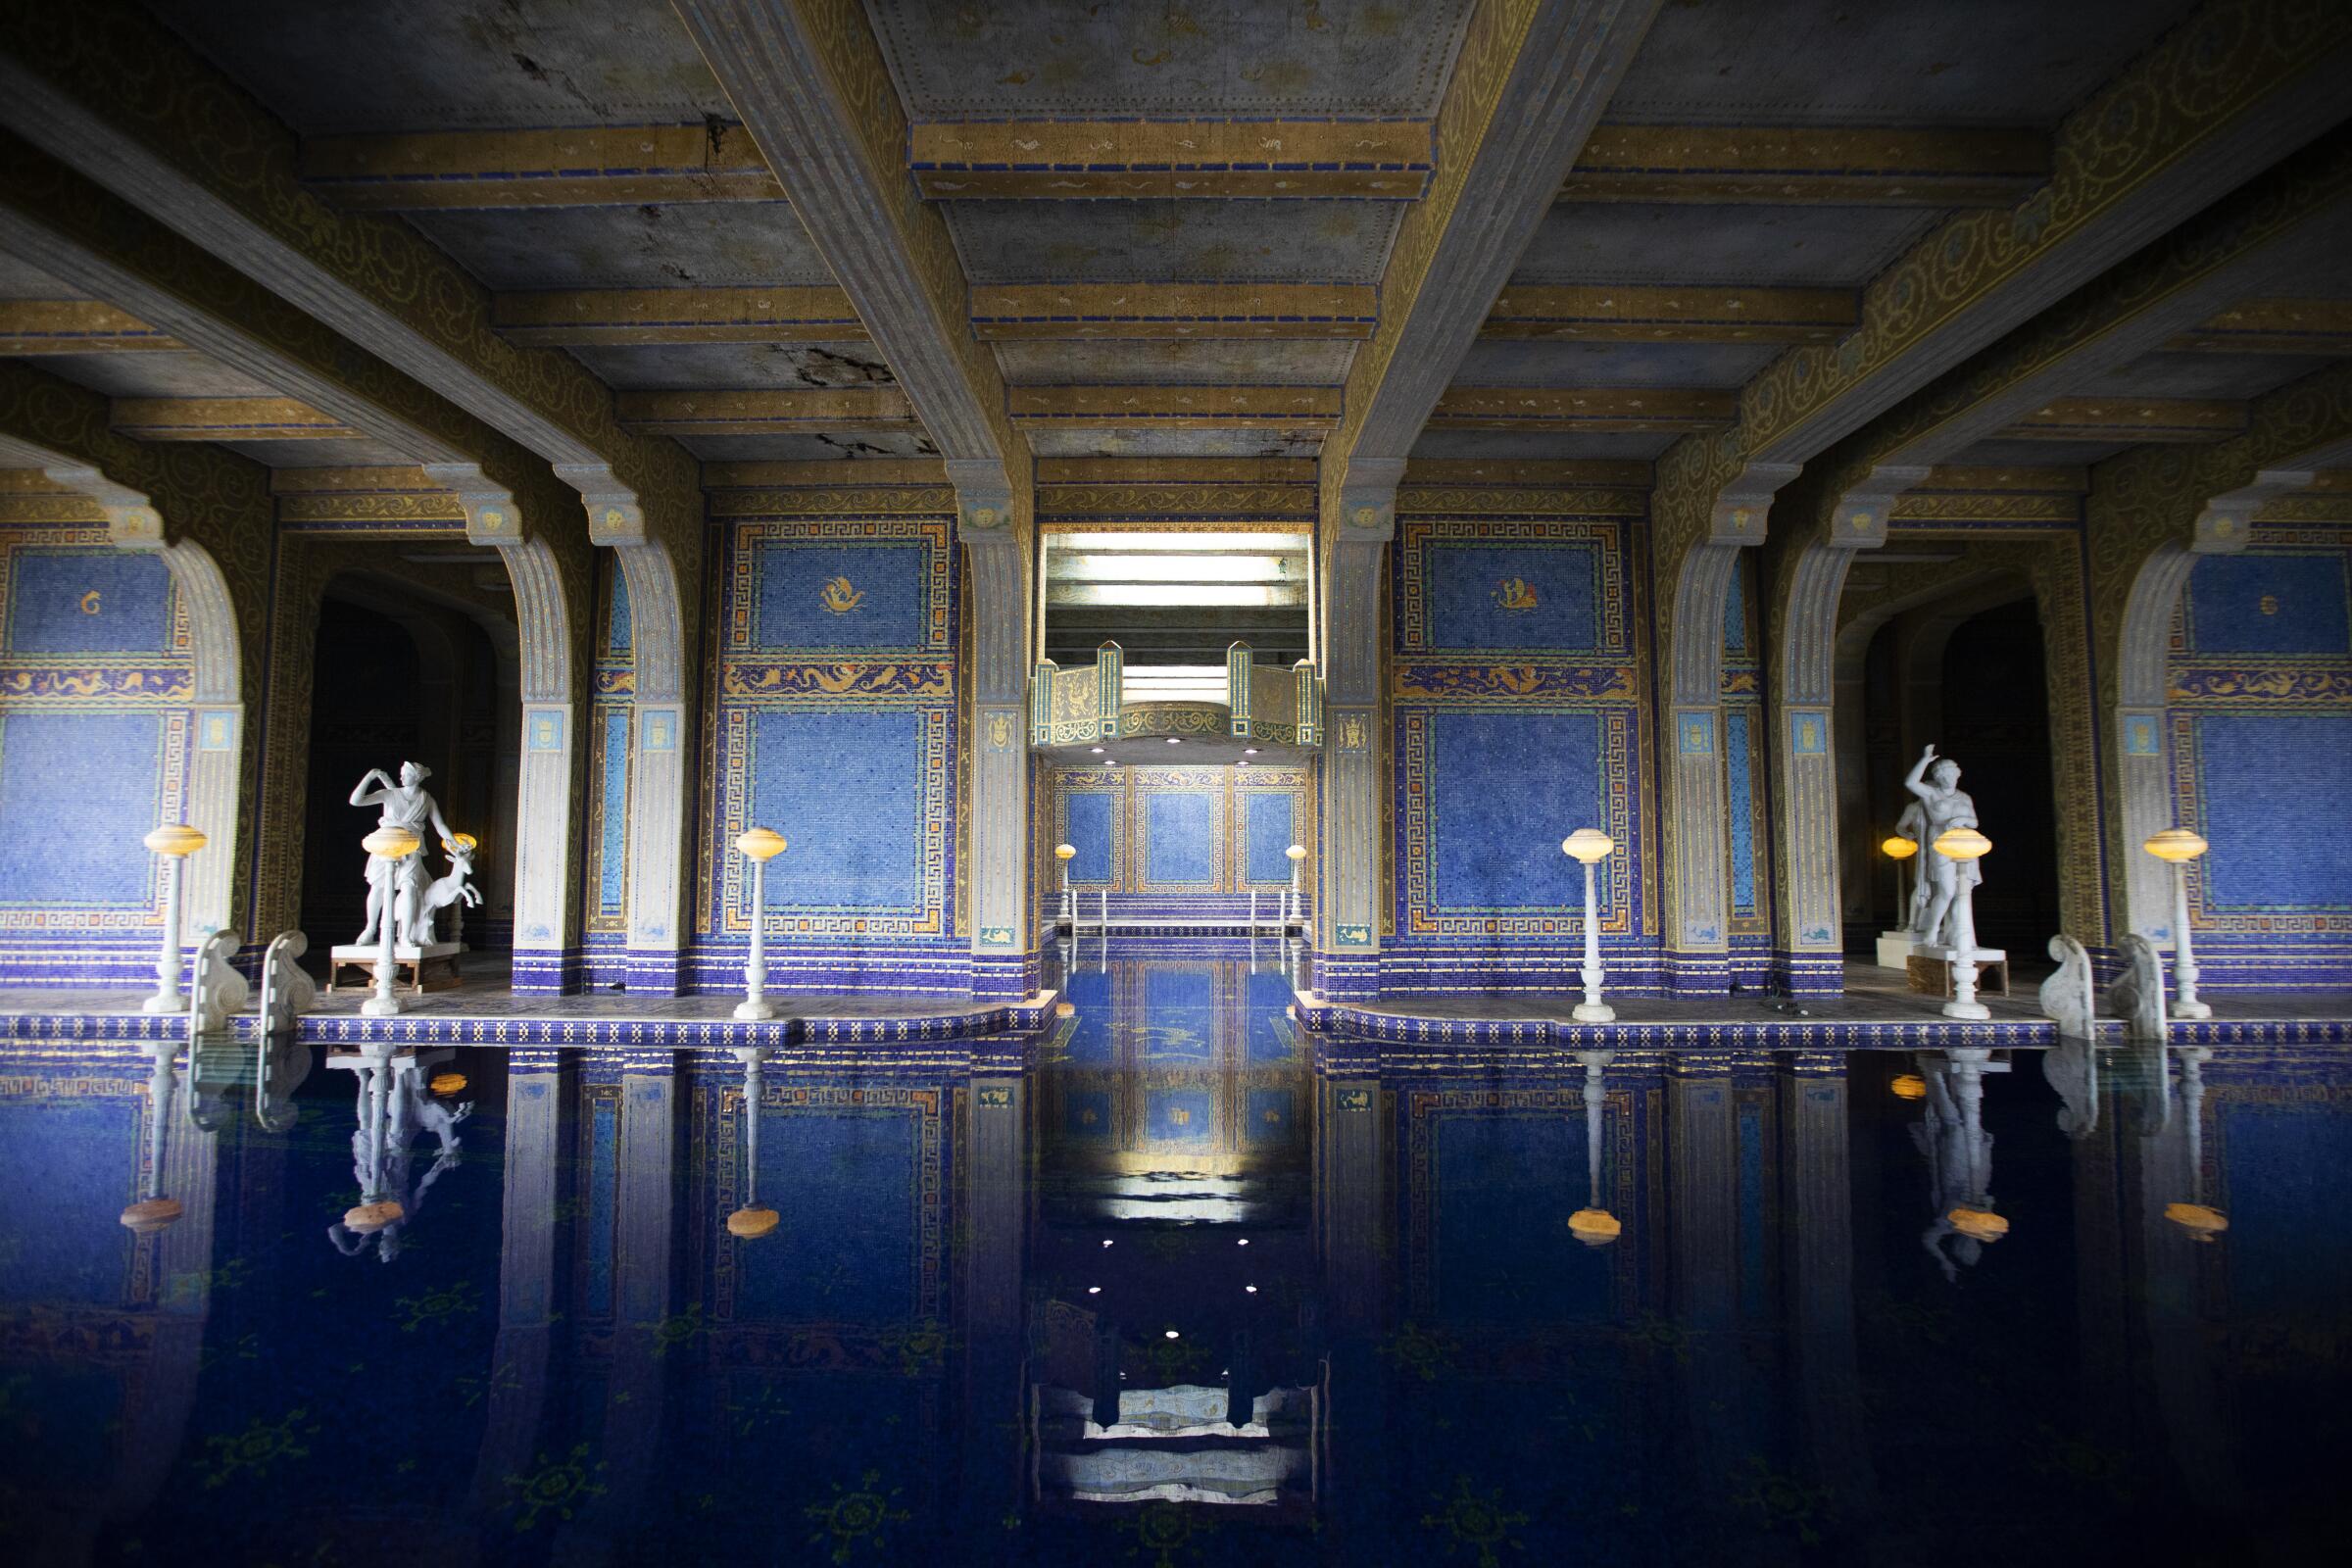 The Roman Pool at Hearst Castle shimmers now that the glass mosaic tiles have been repaired.